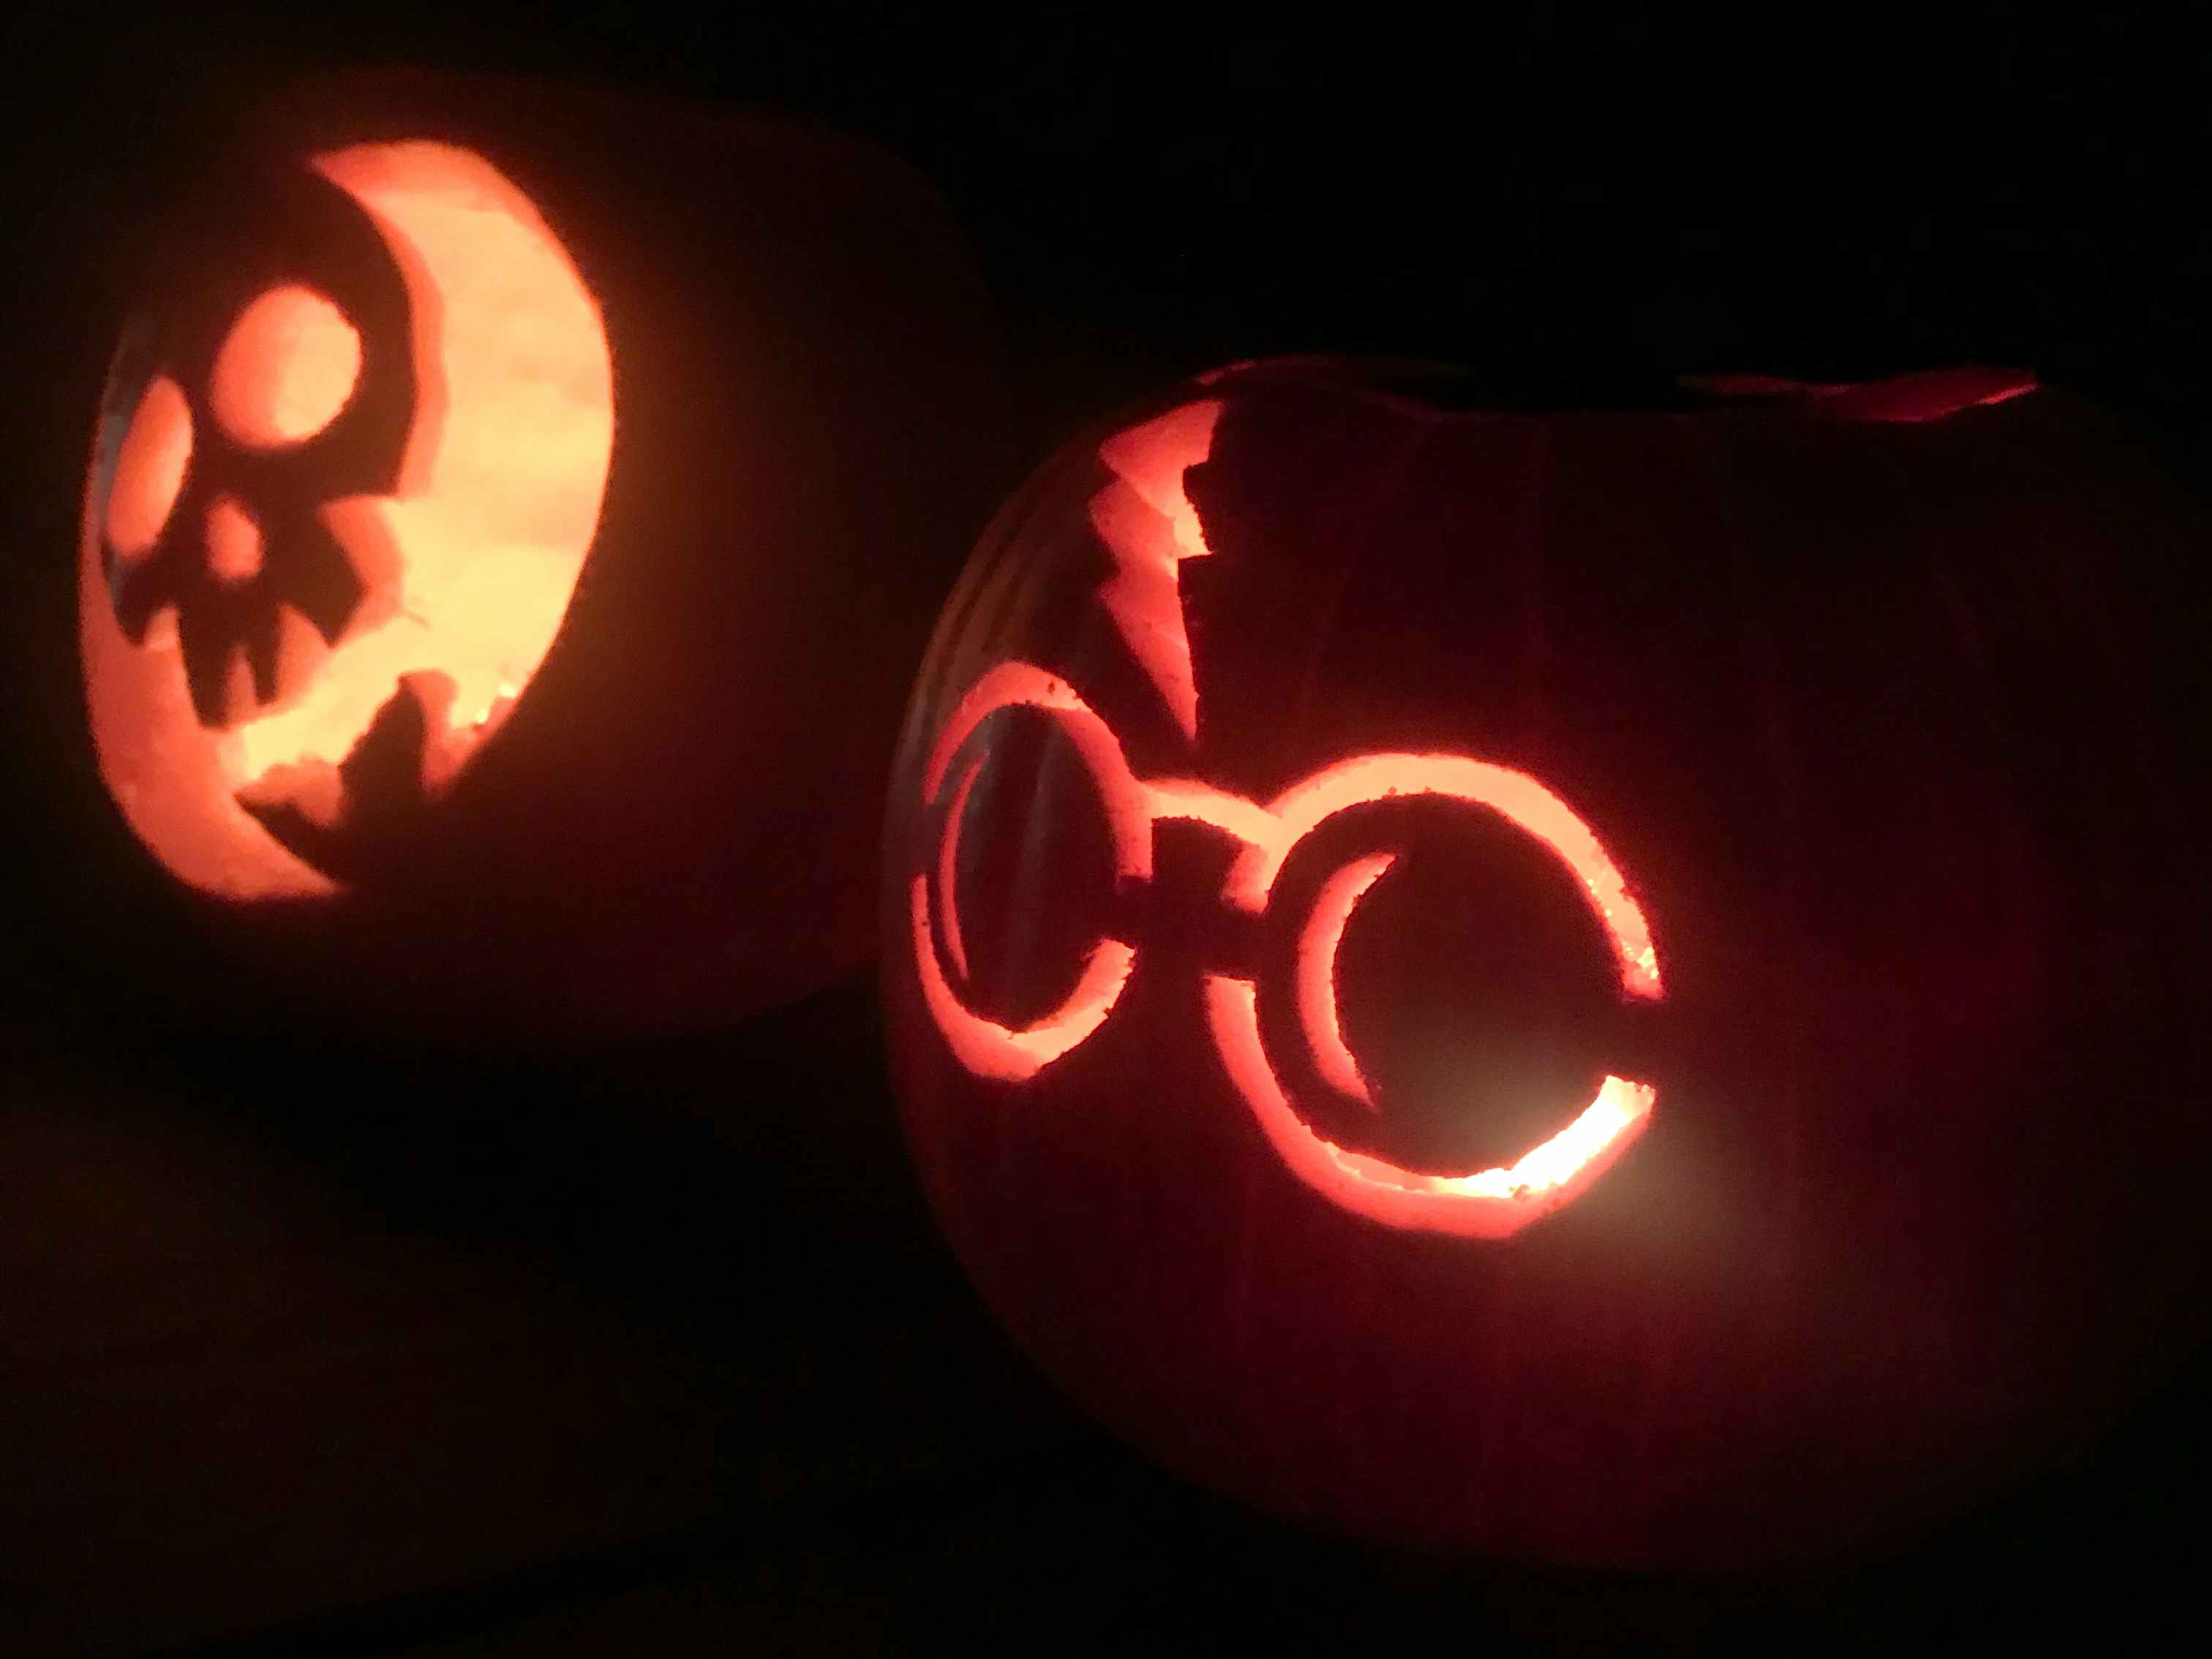 Two carved pumpkins